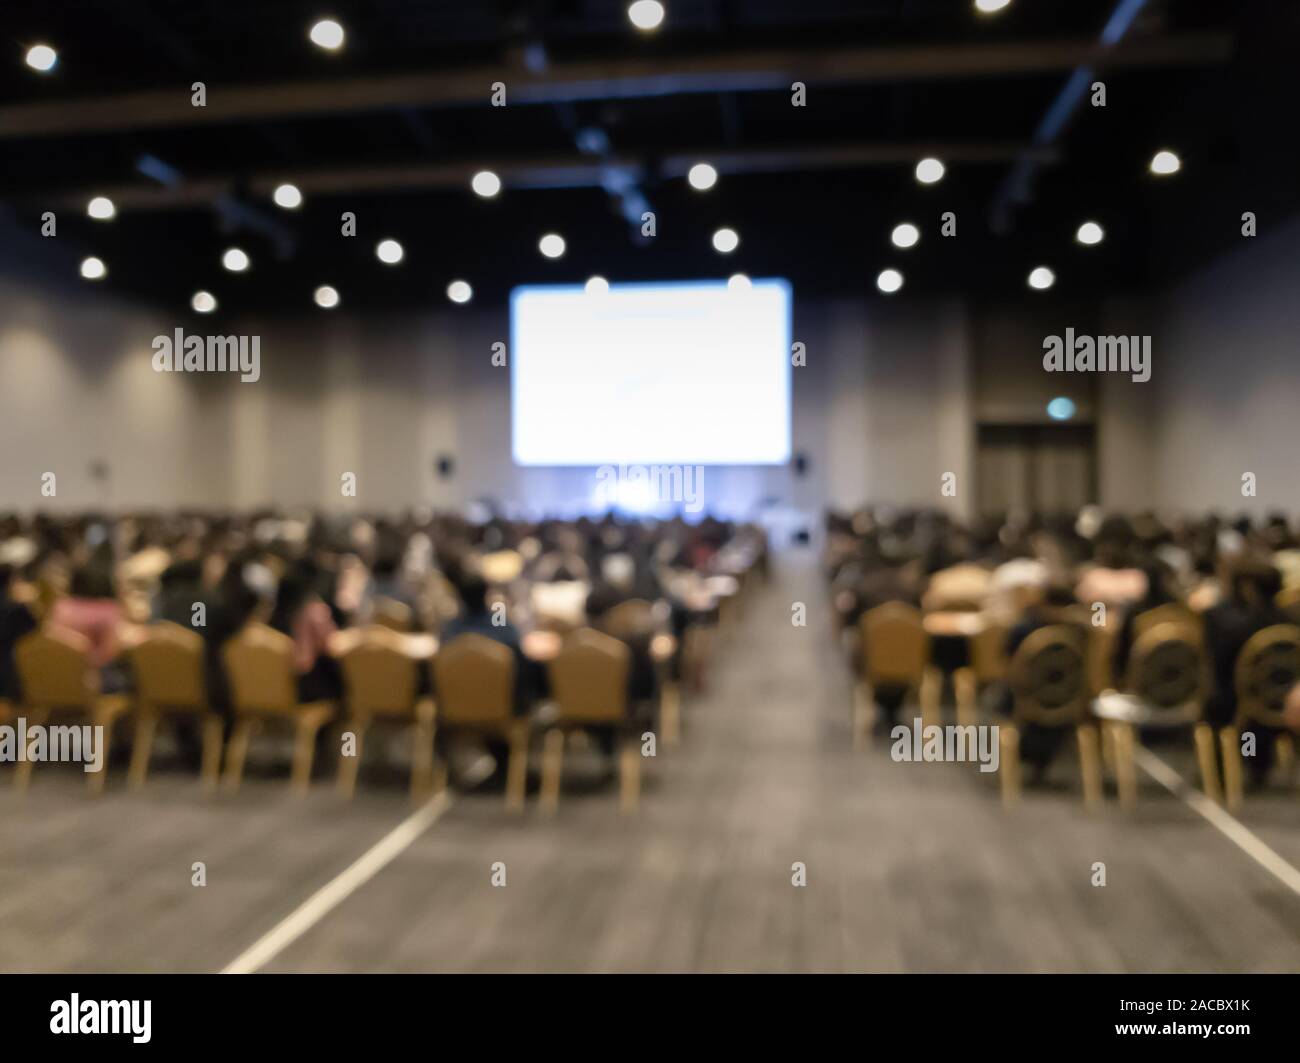 Blurry image in conference room. Abstract blurred people lecture and discussion in seminar room or conference room ,business concept. Stock Photo